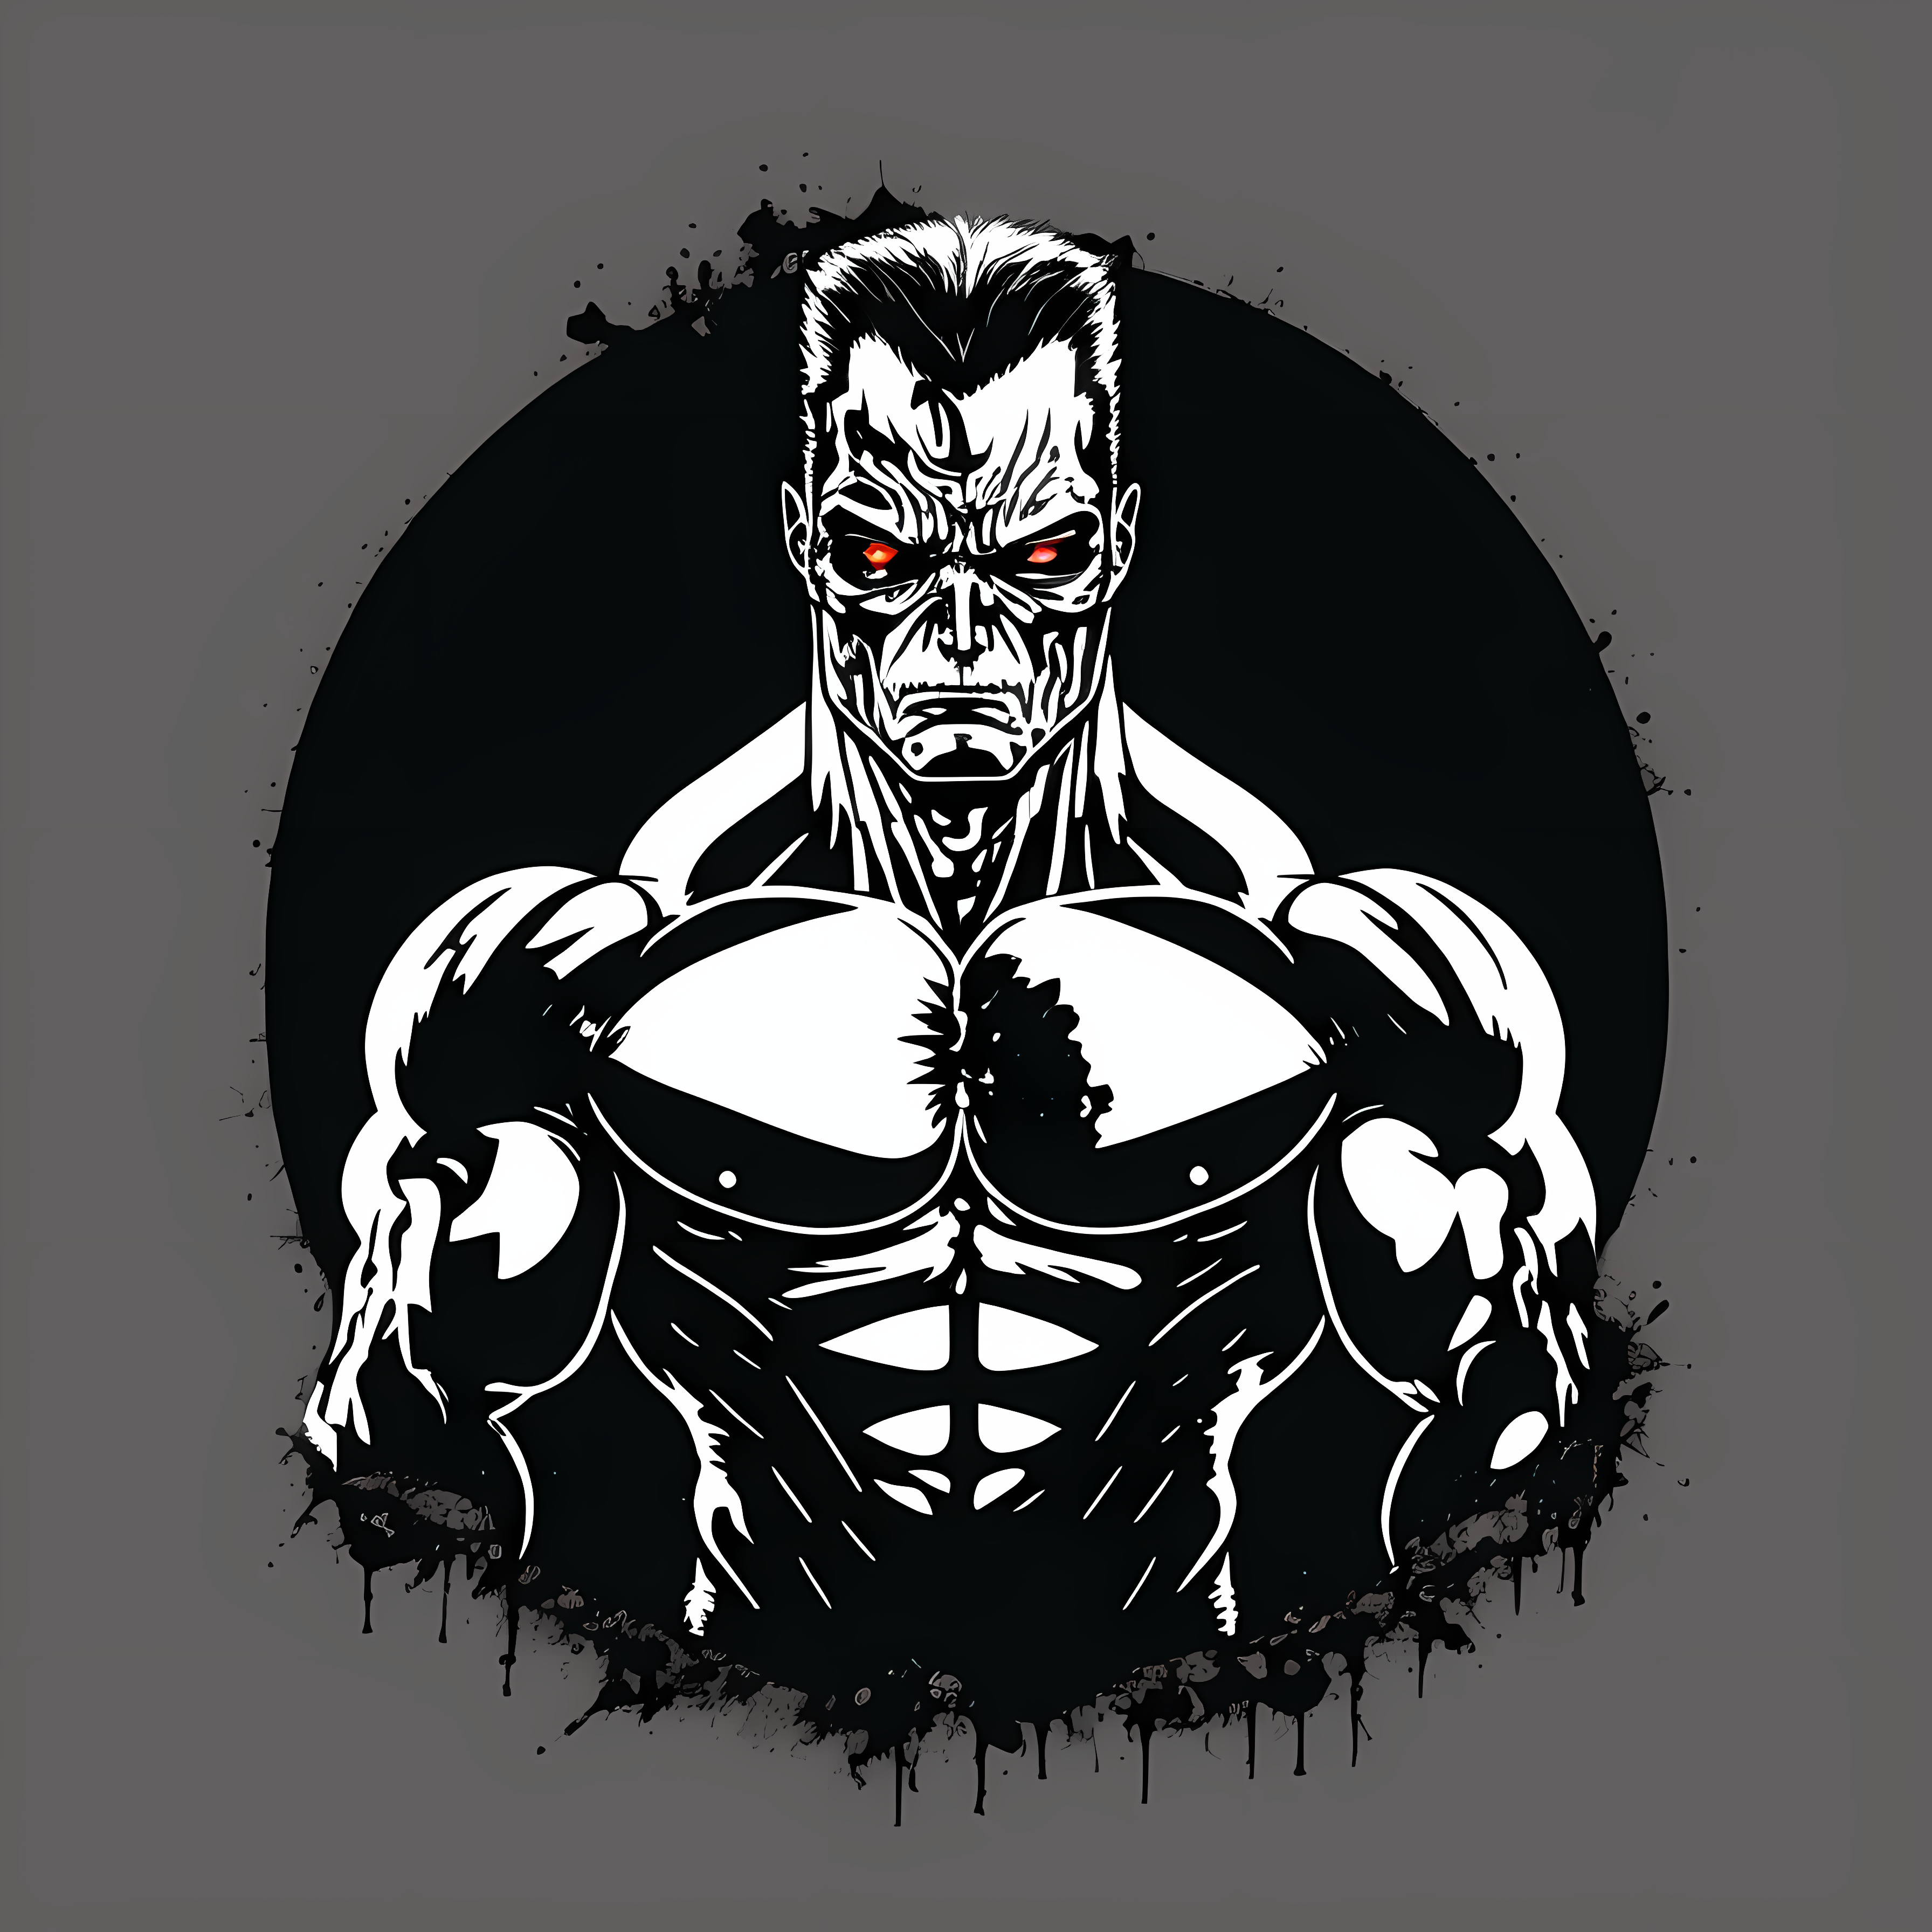 a terminator t-1000 on a !!! black baground !!!.  as a t-shirt logo in the style of <MAGIFACTORY> art